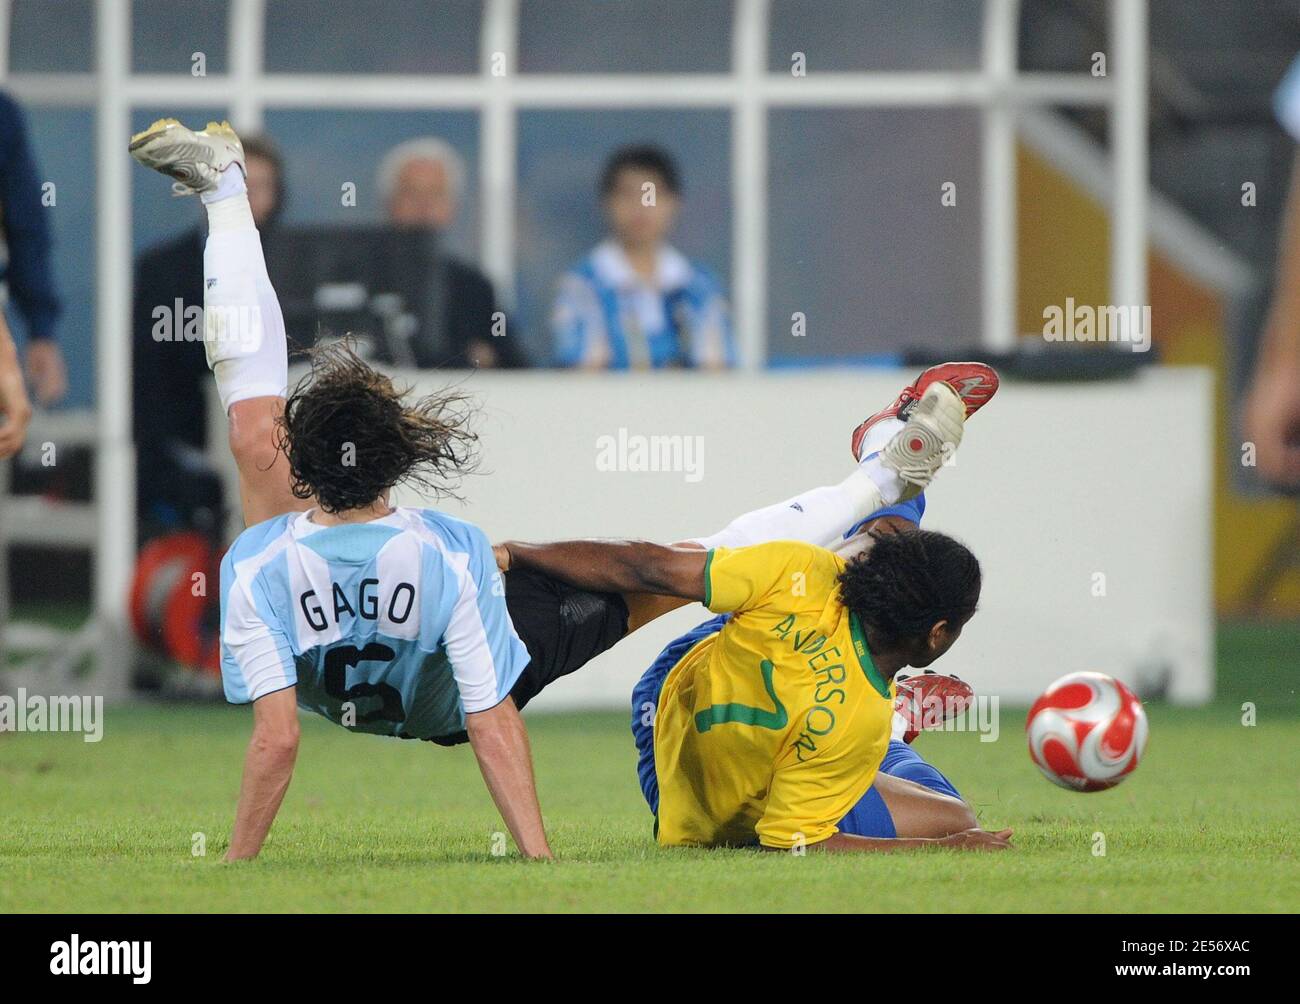 Argentina's Fernando Gago is tackled by Brazil's Anderson during the football semi-final match held at the Worker's Stadium for the 2008 Beijing Olympics, August 19, 2008. Argentina defeats Brazil 3-0. Photo by Gouhier-Hahn-Nebinger/Cameleon/ABACAPRESS.COM Stock Photo